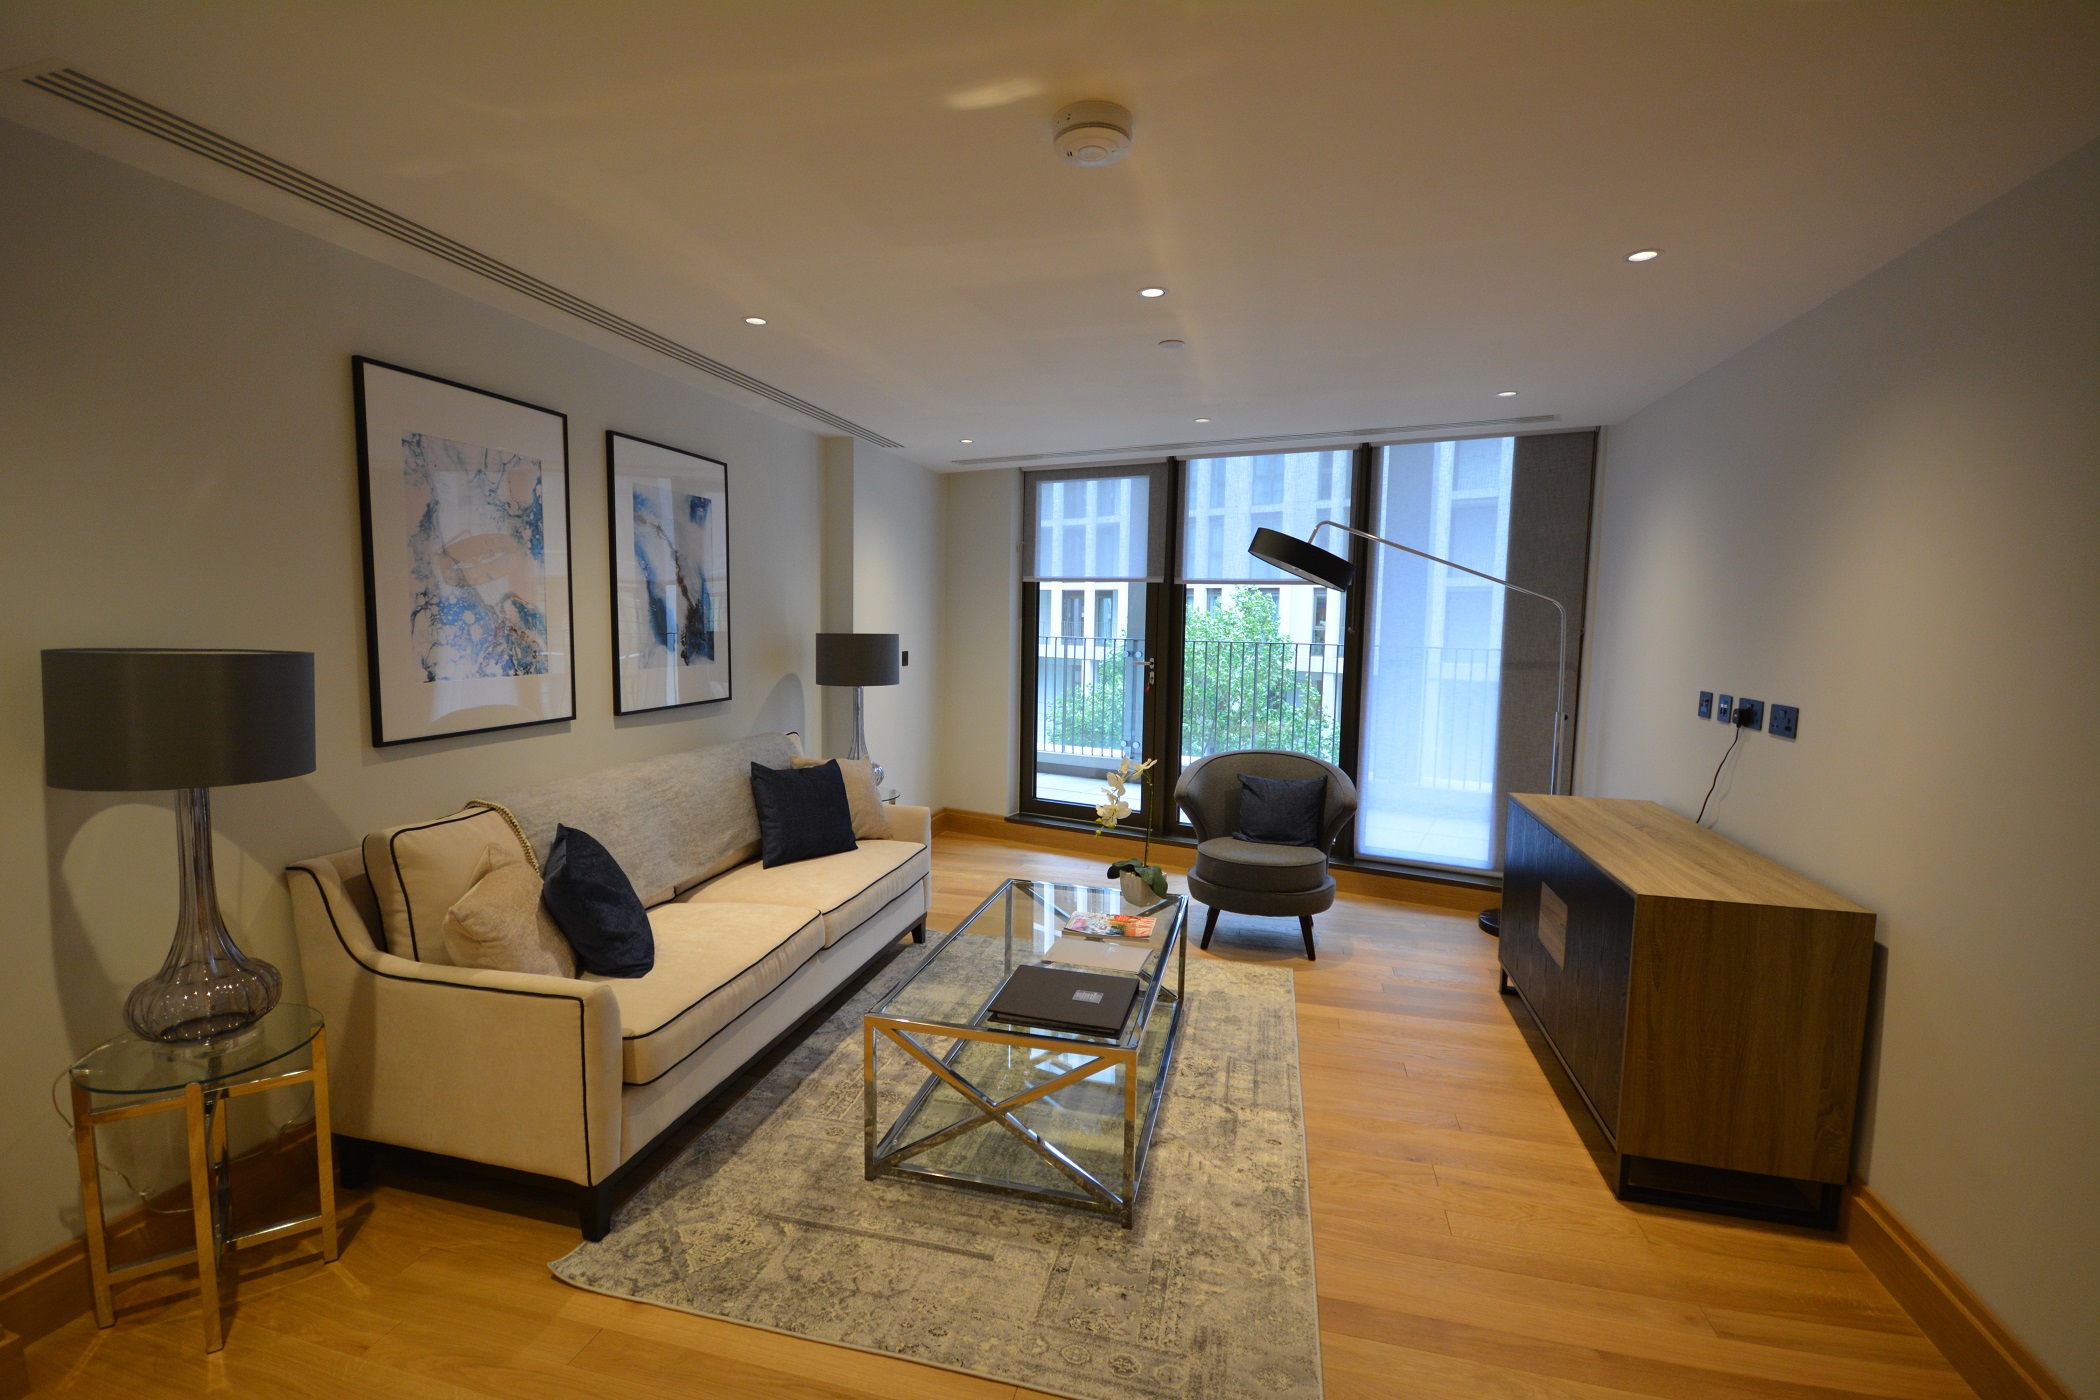 Fantastic one bedroom apartment in Cleland House, Westminster!